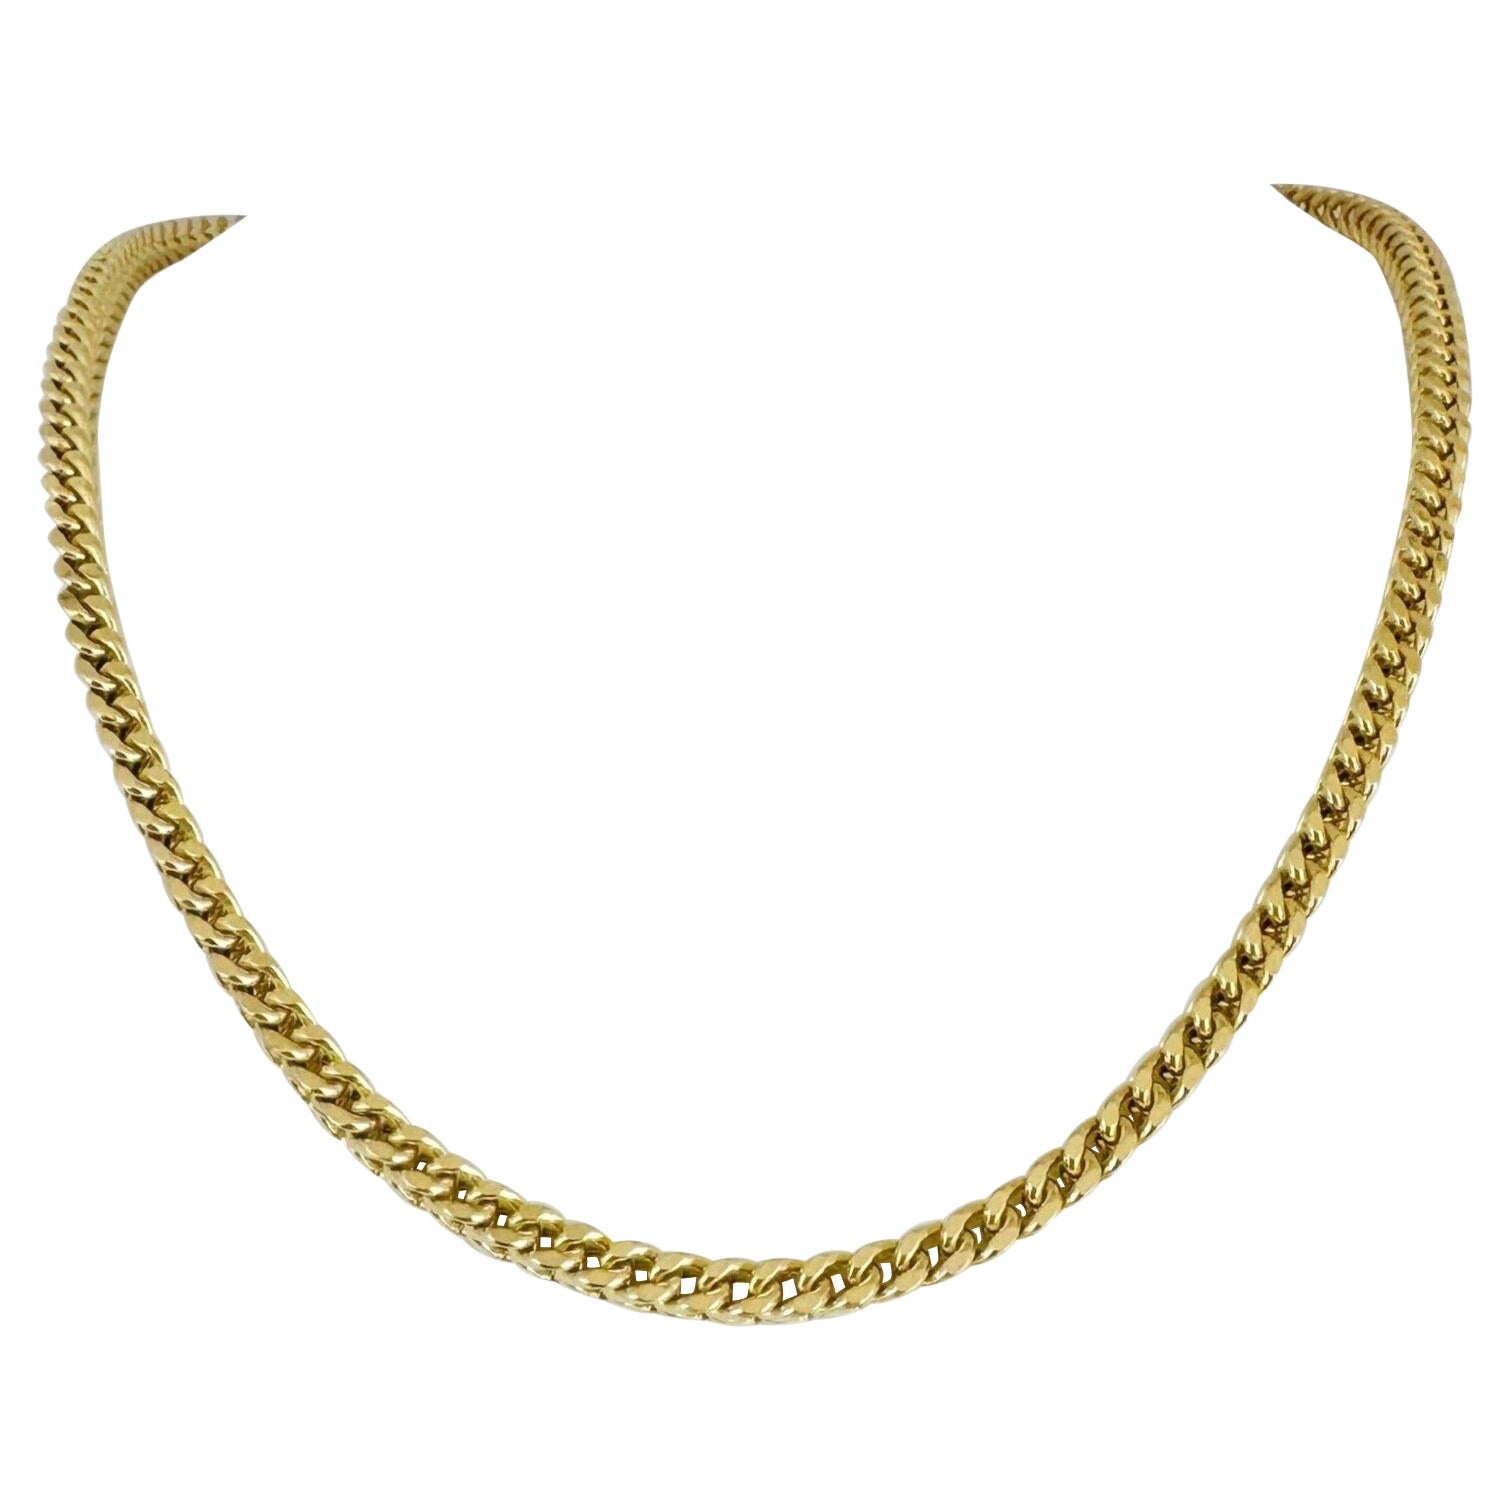 14 Karat Yellow Gold Men's Thick Squared Franco Link Chain Necklace